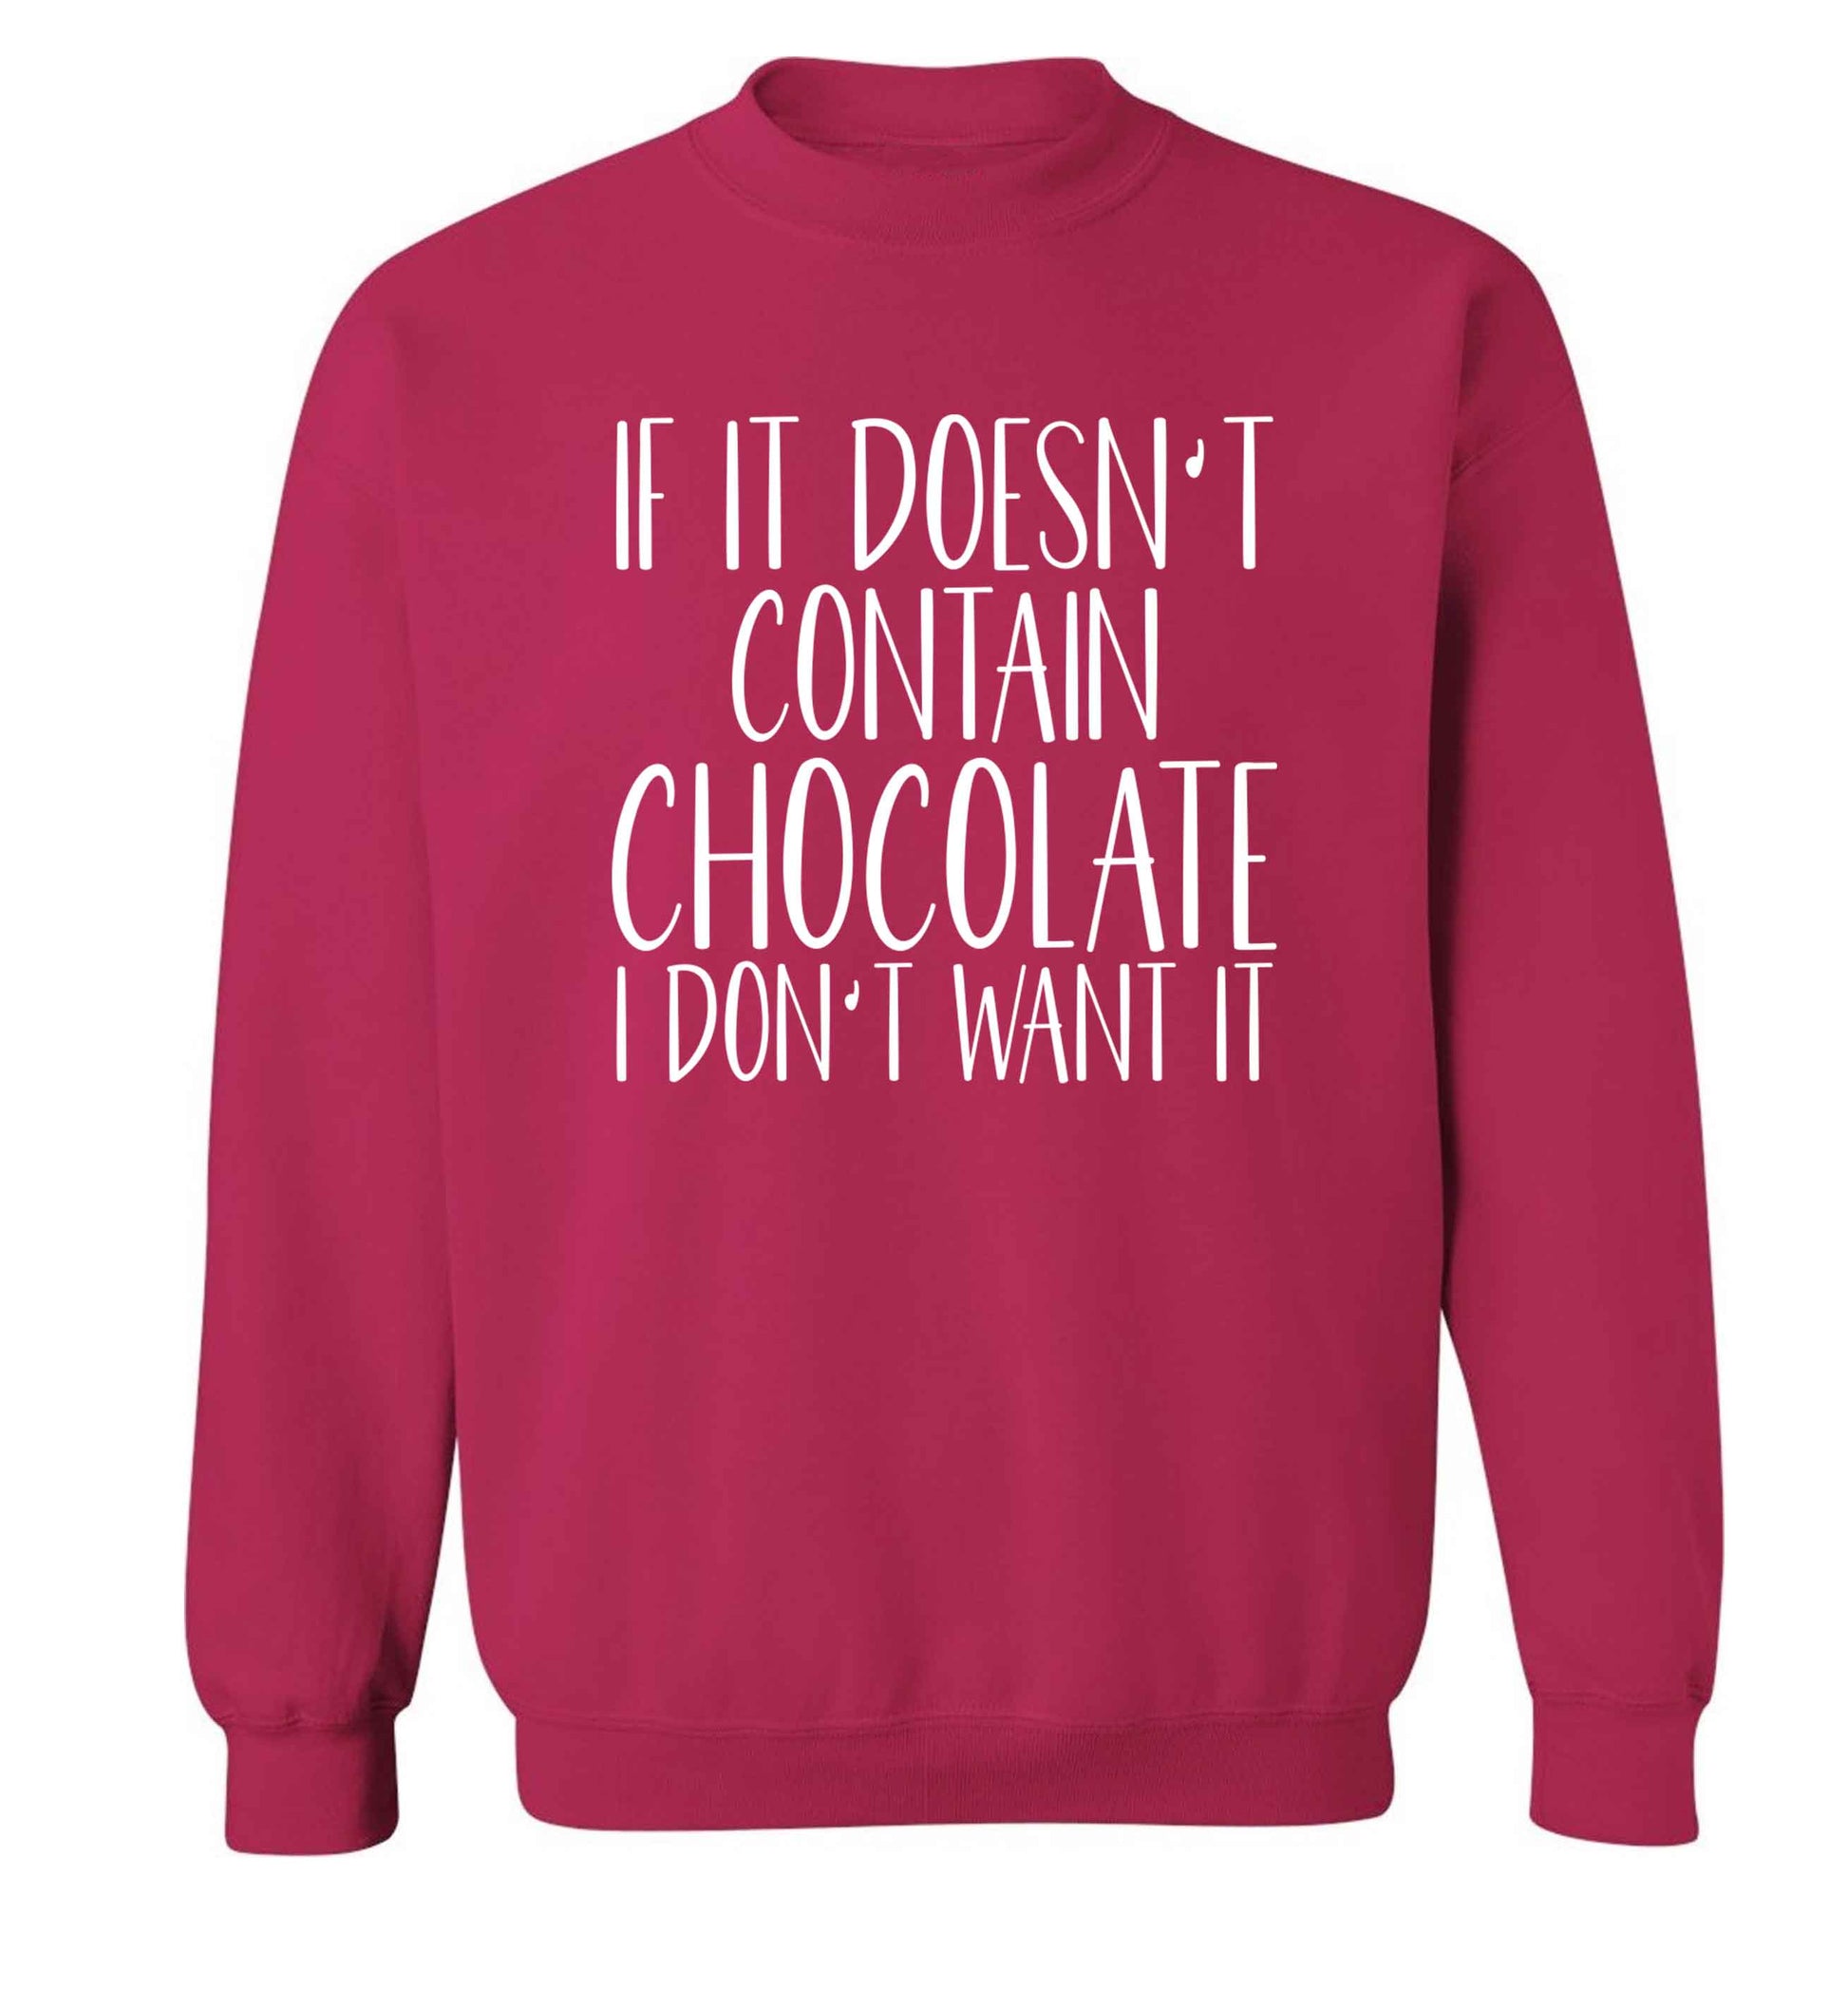 If it doesn't contain chocolate I don't want it adult's unisex pink sweater 2XL